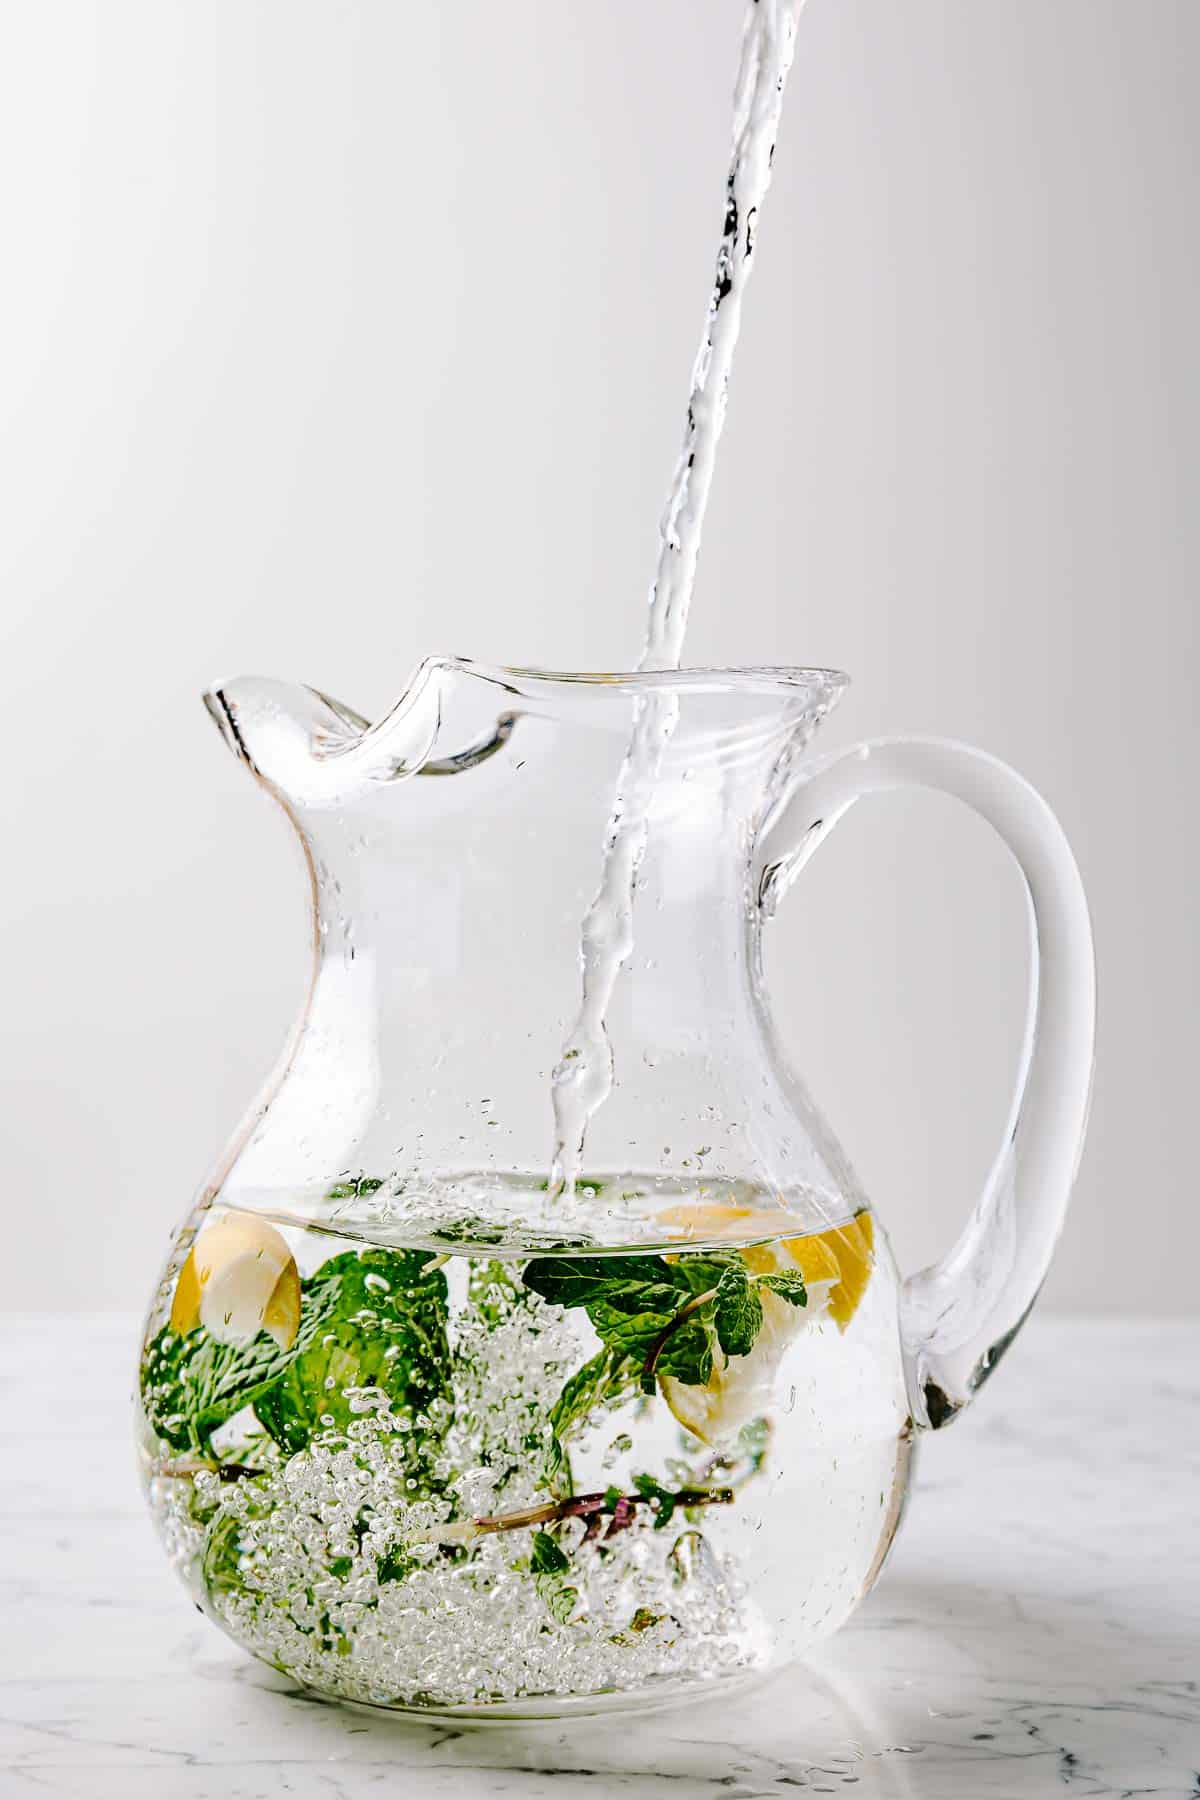 Lemon and mint in a glass pitcher filling with water.